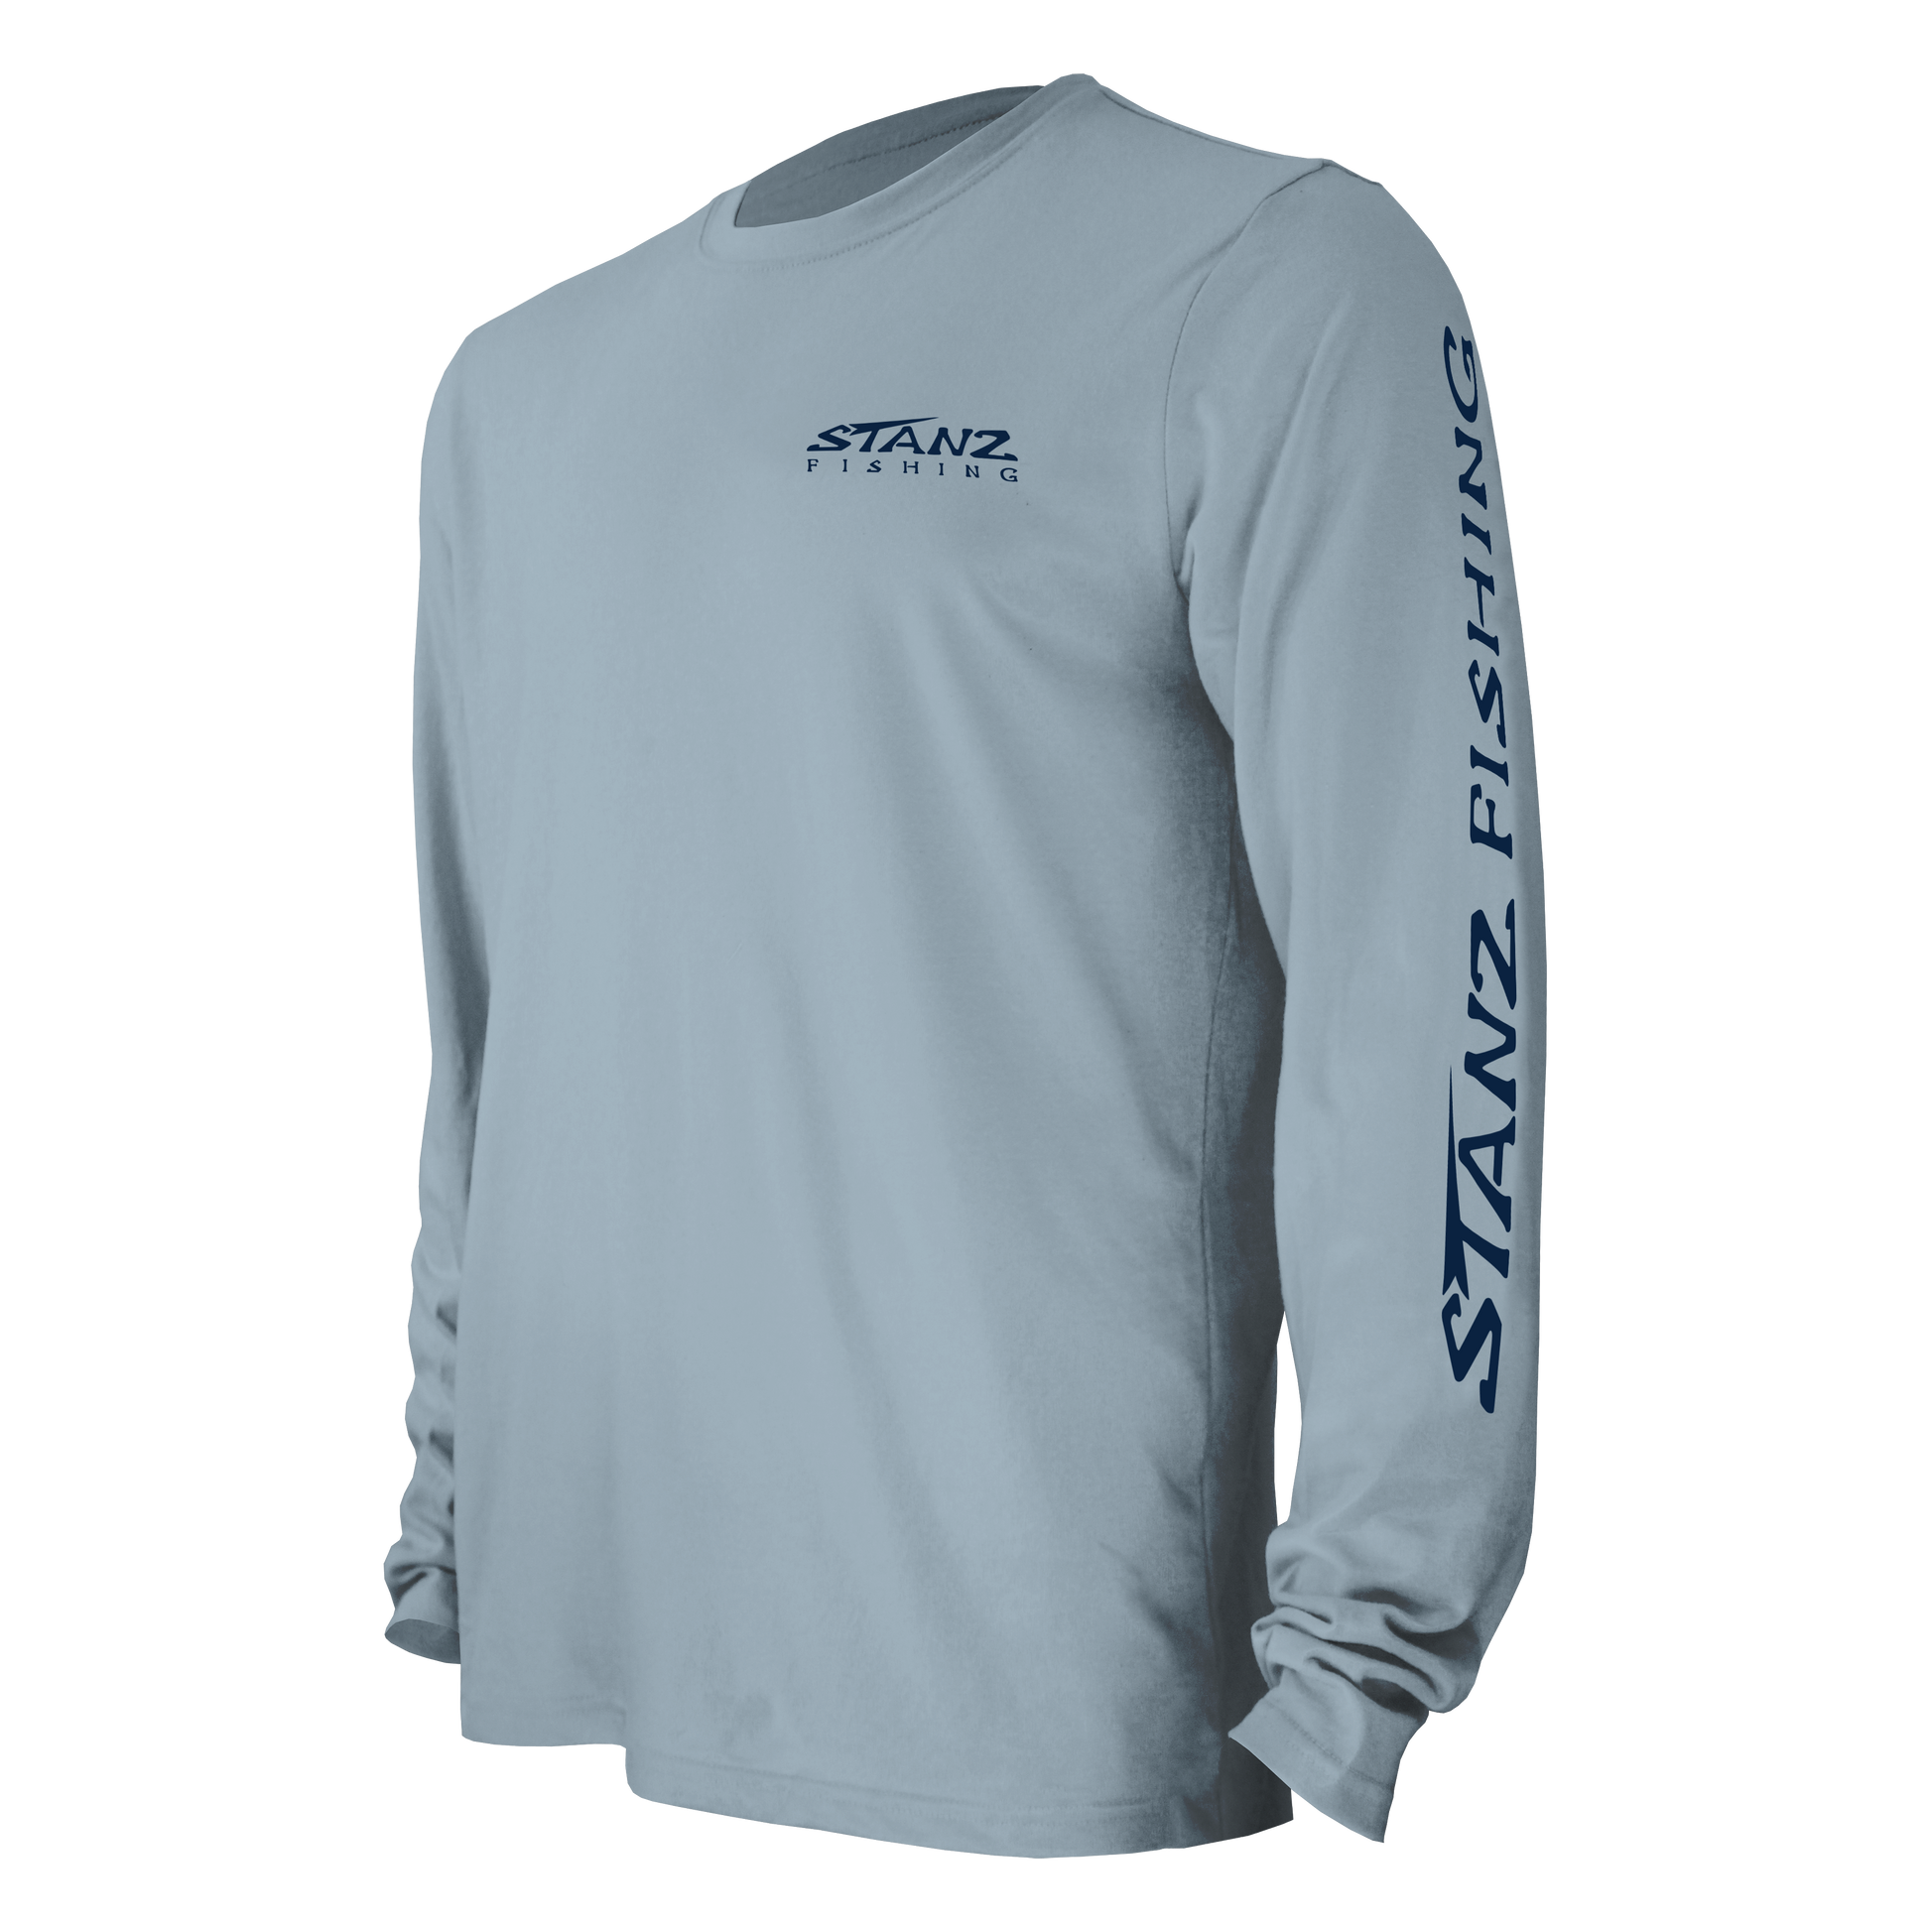 Men's Long Sleeve Tee - Stanz Iconic Small / Grey